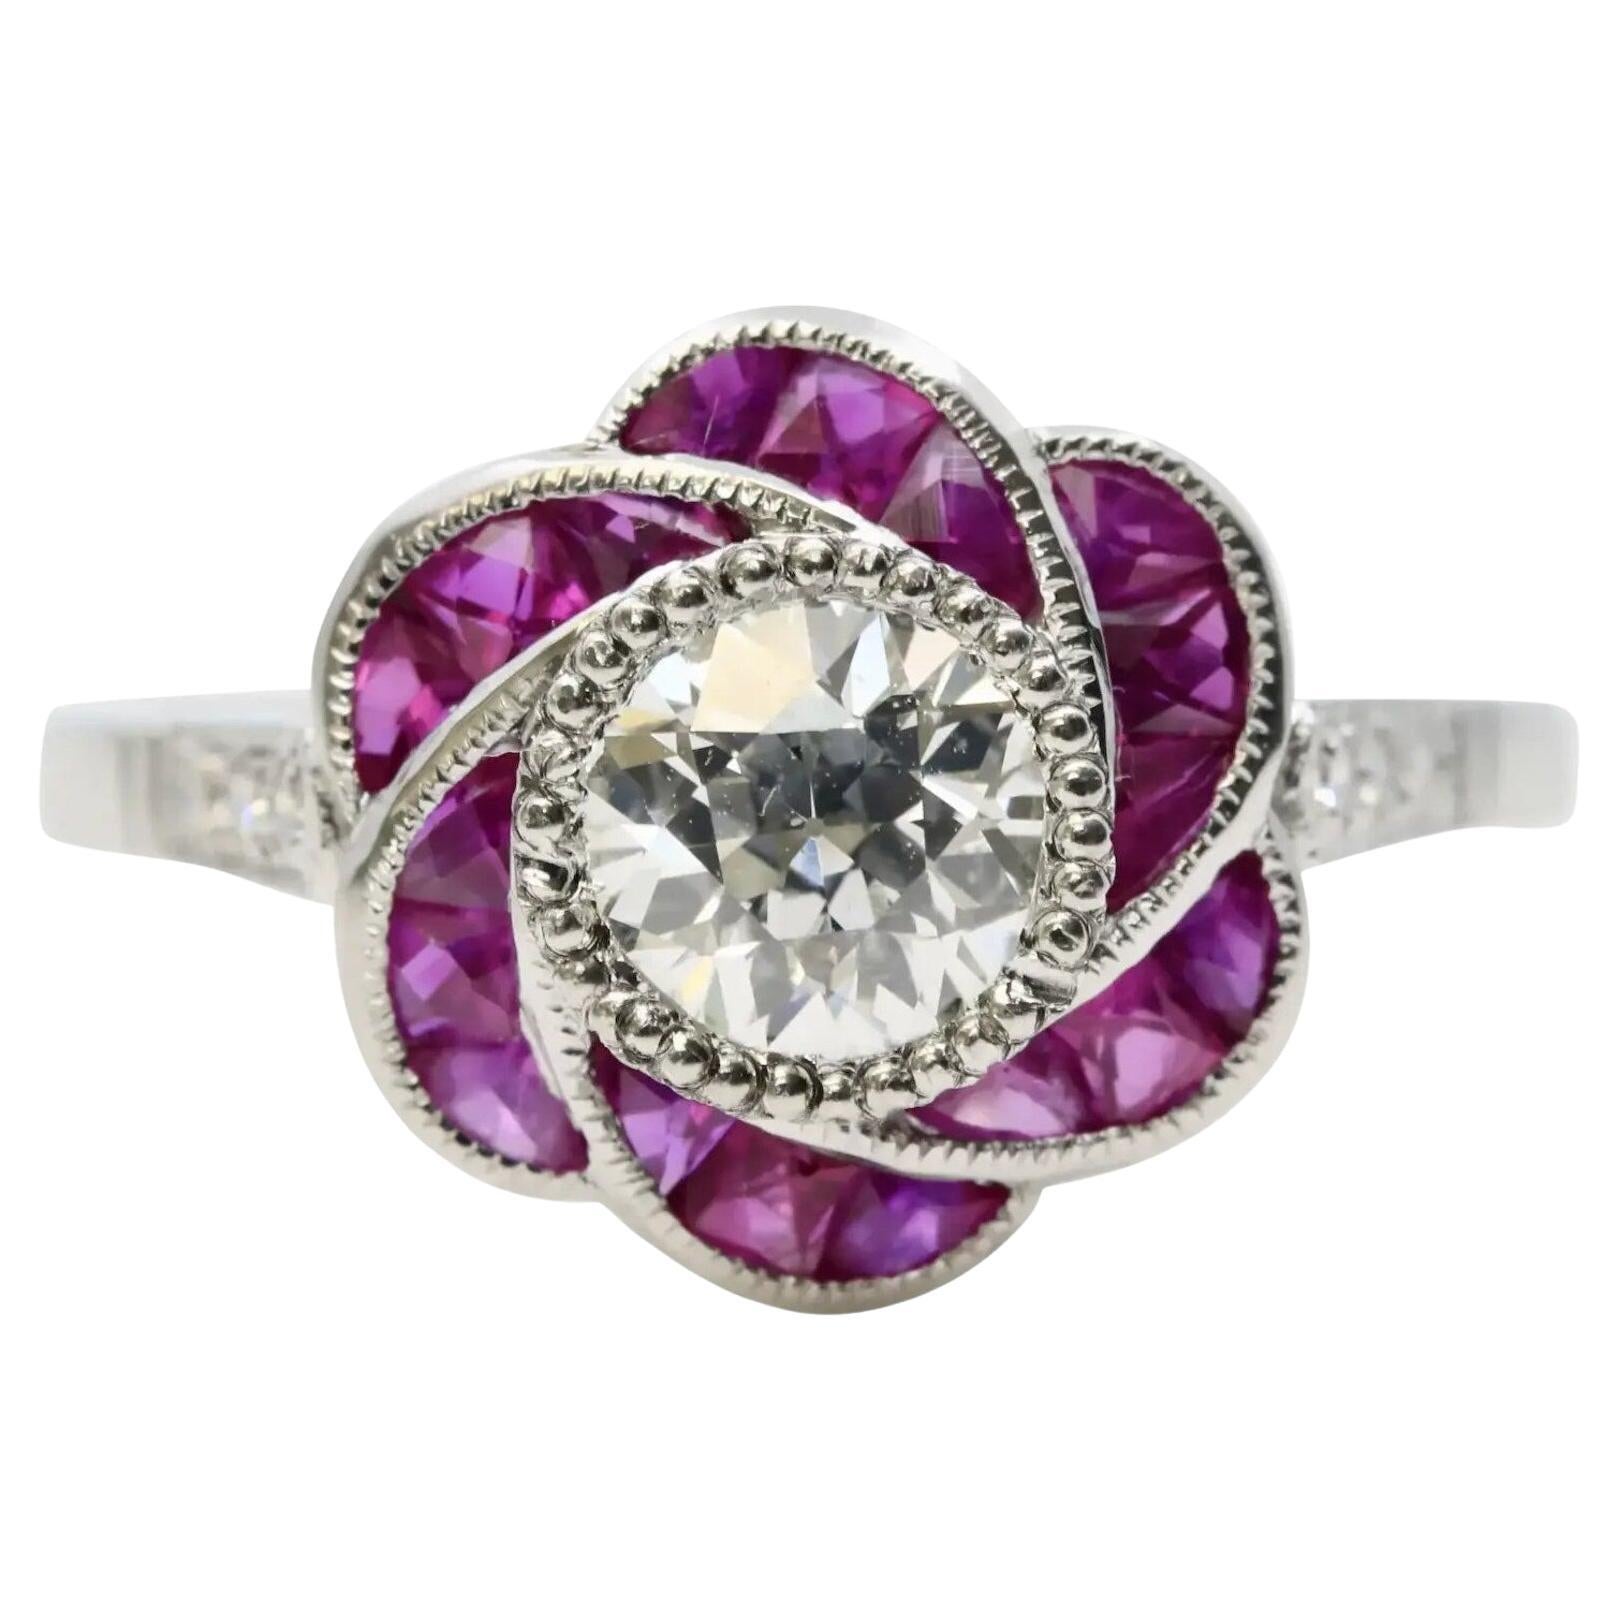 Floral Art Deco Old European Diamond & Ruby Engagement Ring in Platinum For Sale